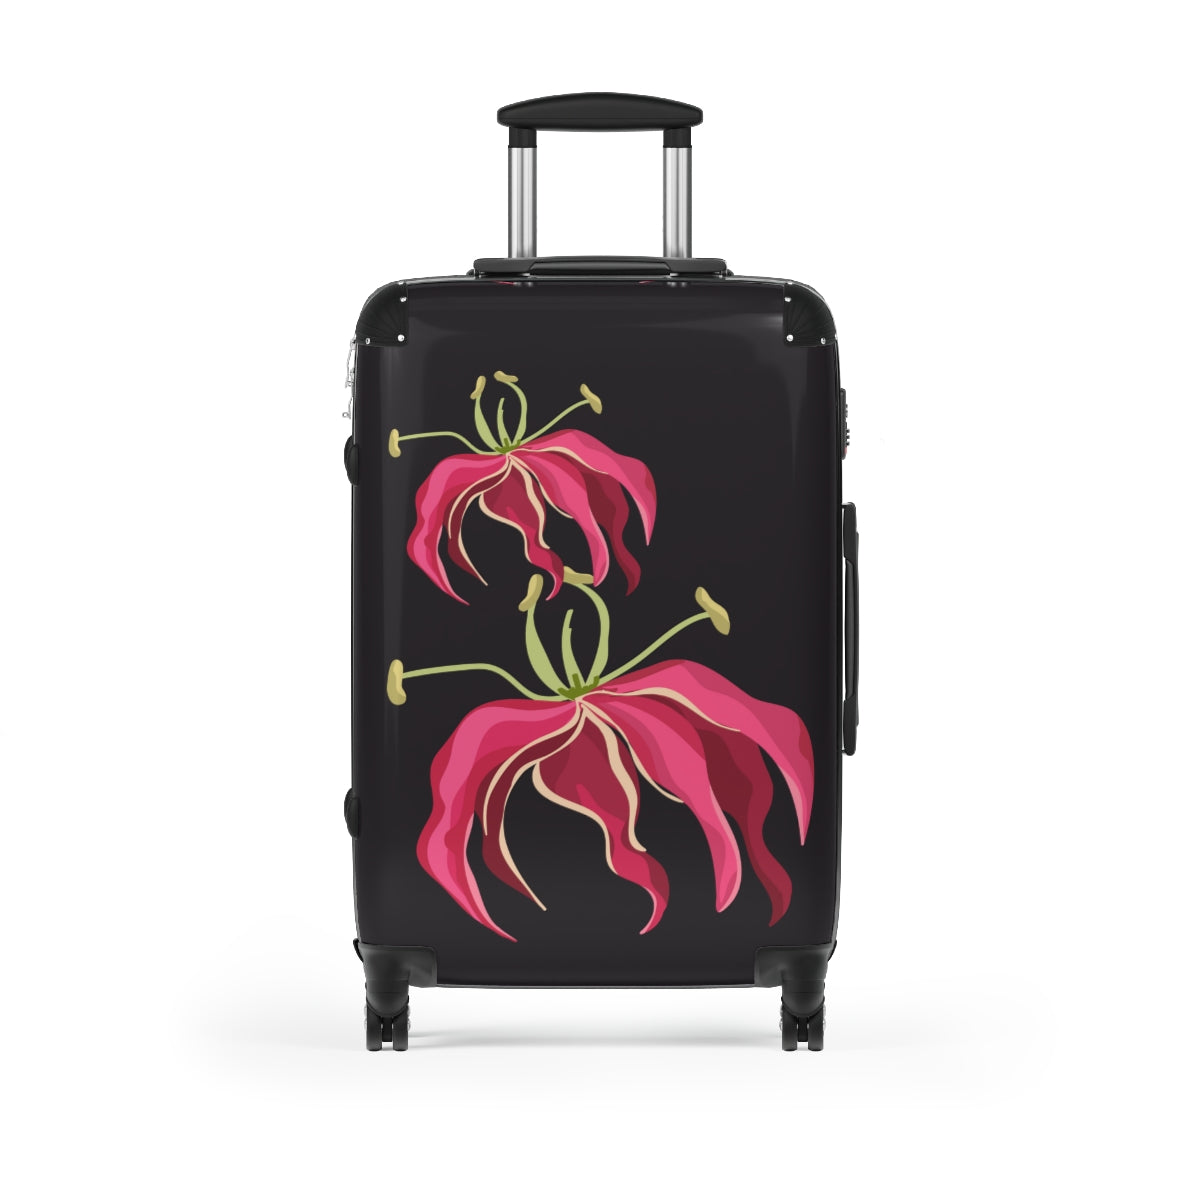 PINK FLORAL SUITCASE SET Artzira, Cabin Suitcase Carry-On Luggage, Trolly Travel Bags Double Wheeled Spinners, Women's Choice, Bridal Gift